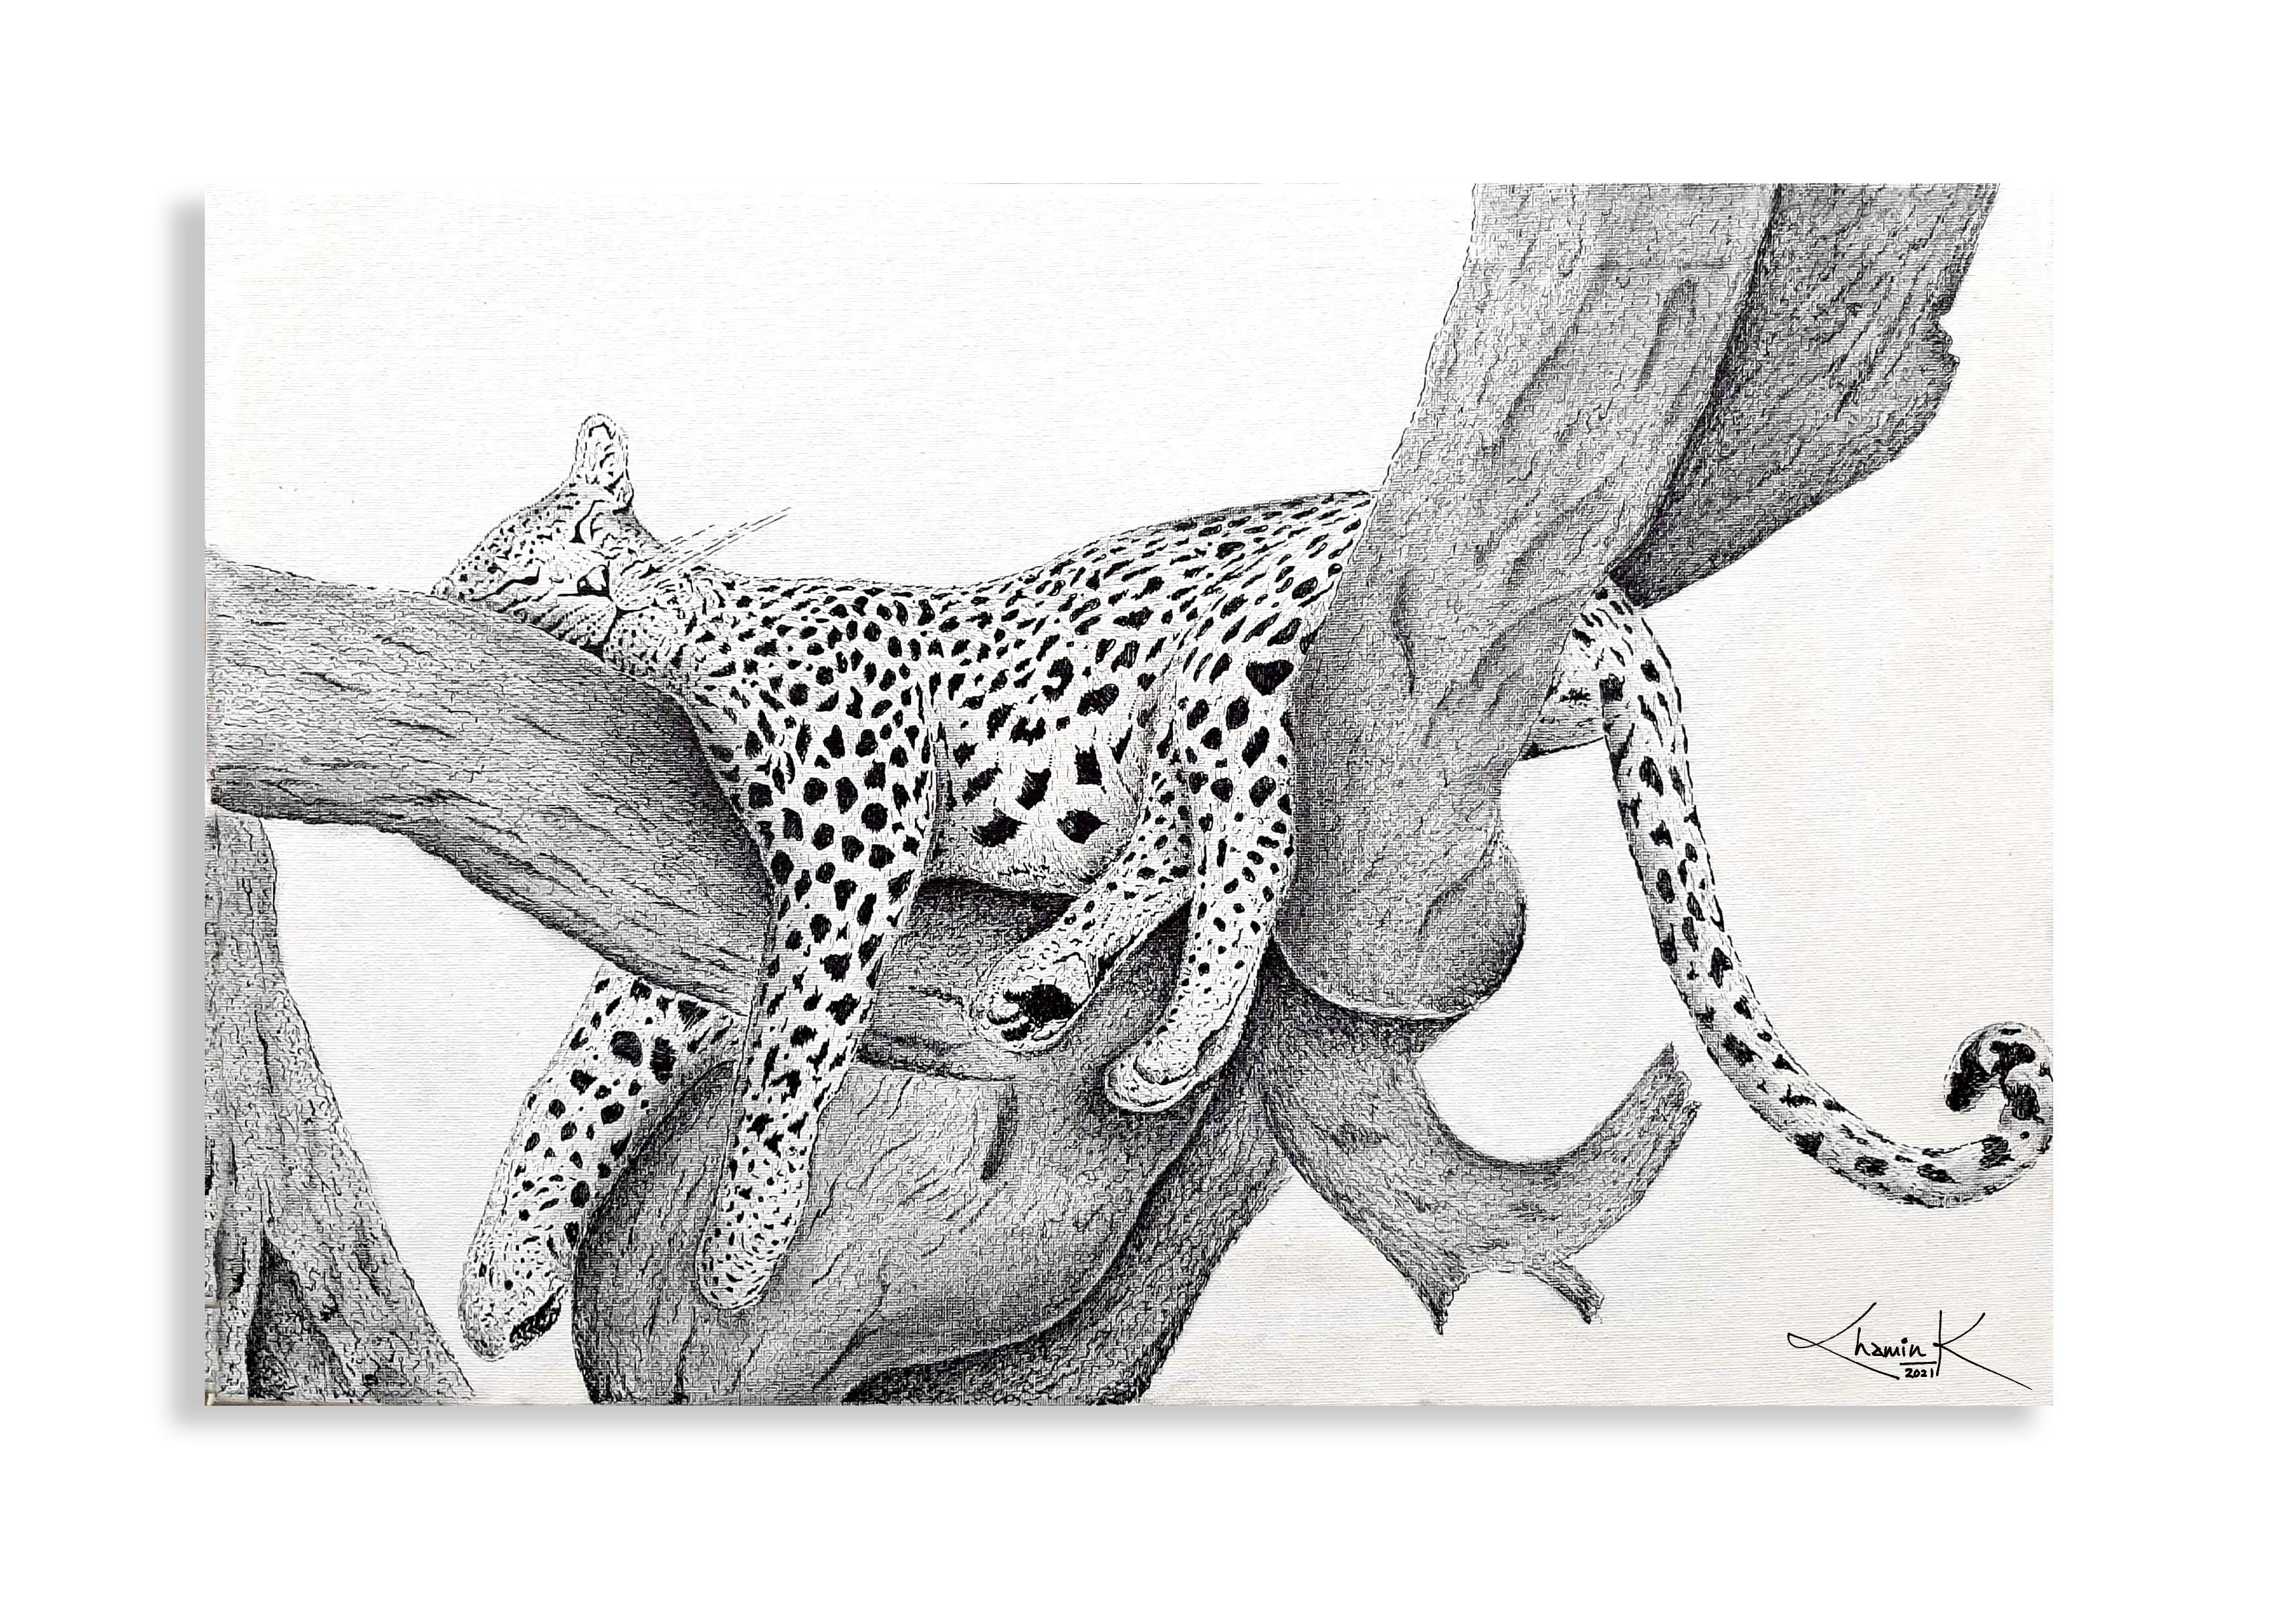 THE SRI LANKAN LEOPARD by Chamin Kalubowila